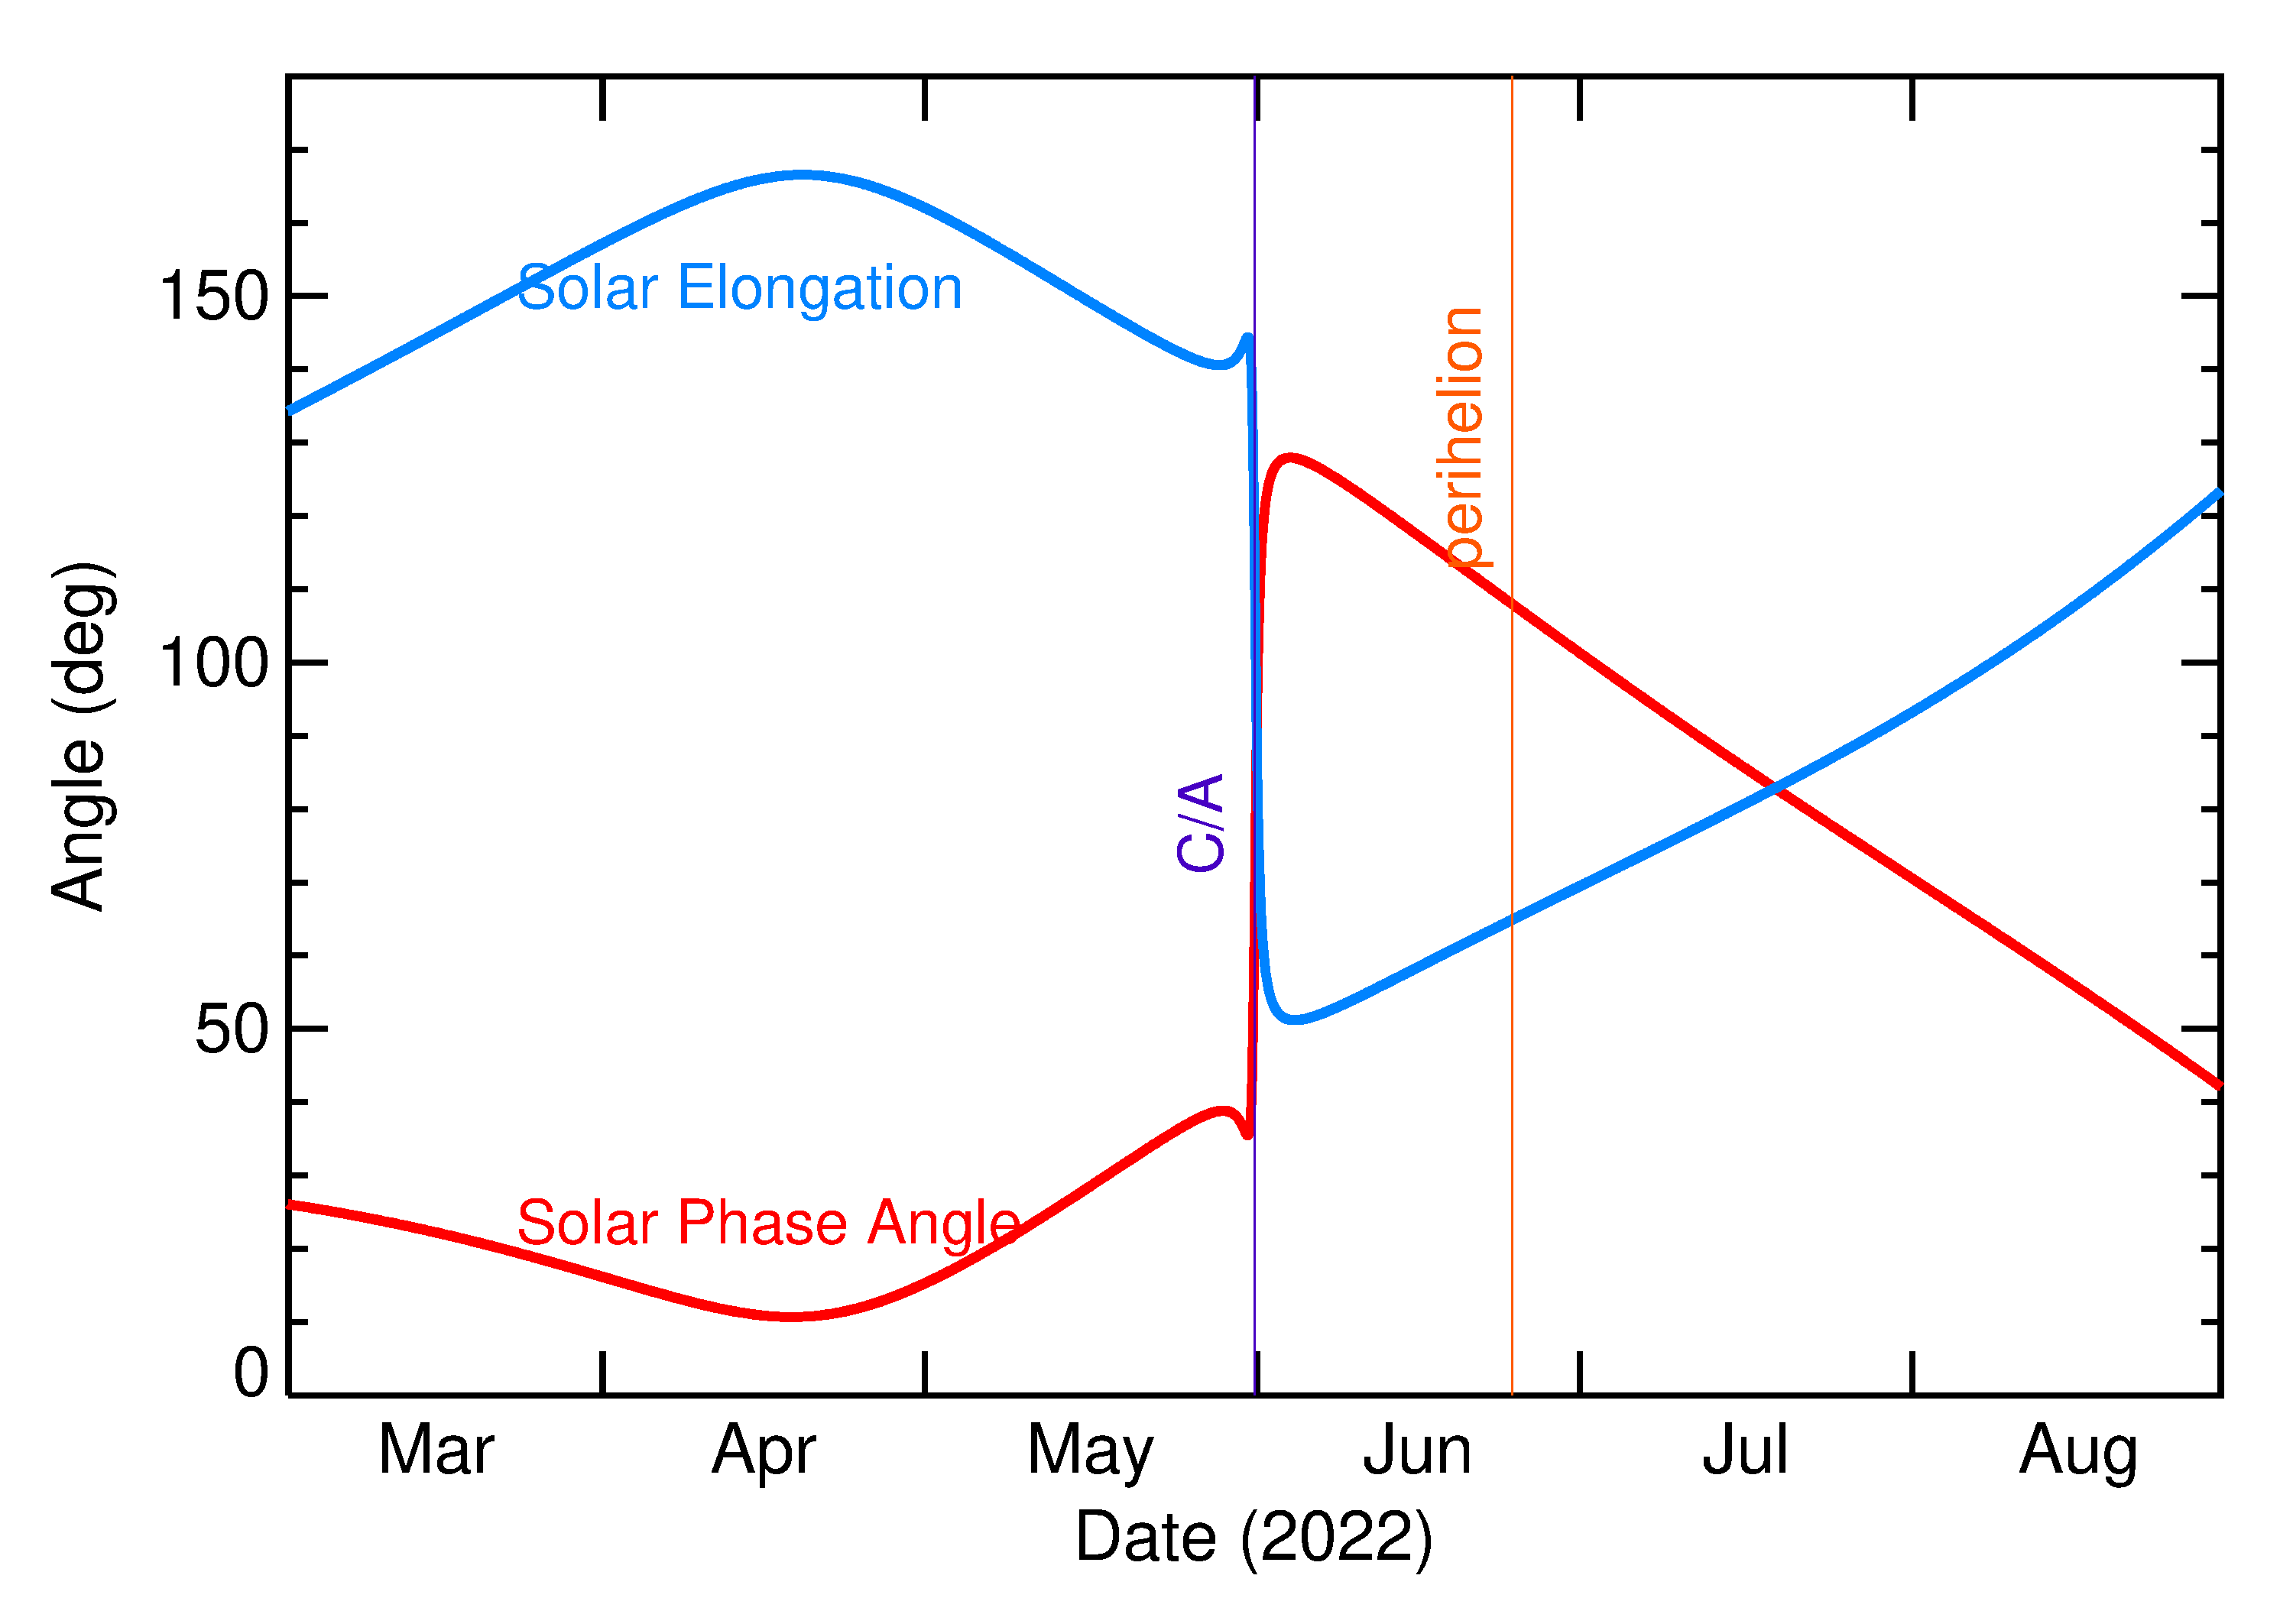 Solar Elongation and Solar Phase Angle of 2022 KO3 in the months around closest approach